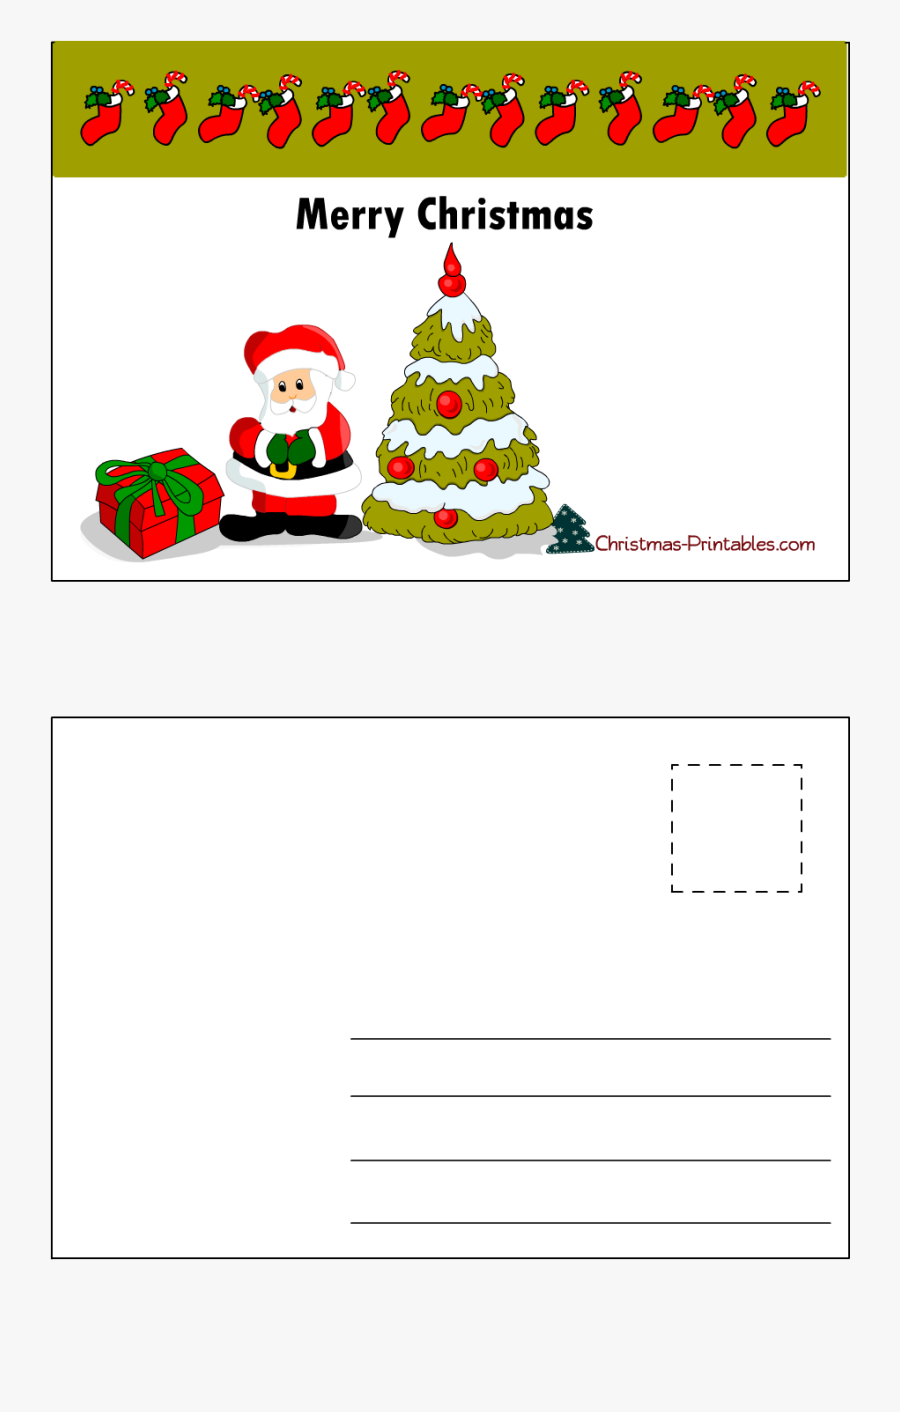 Free Printable Christmas Cards, Transparent Clipart